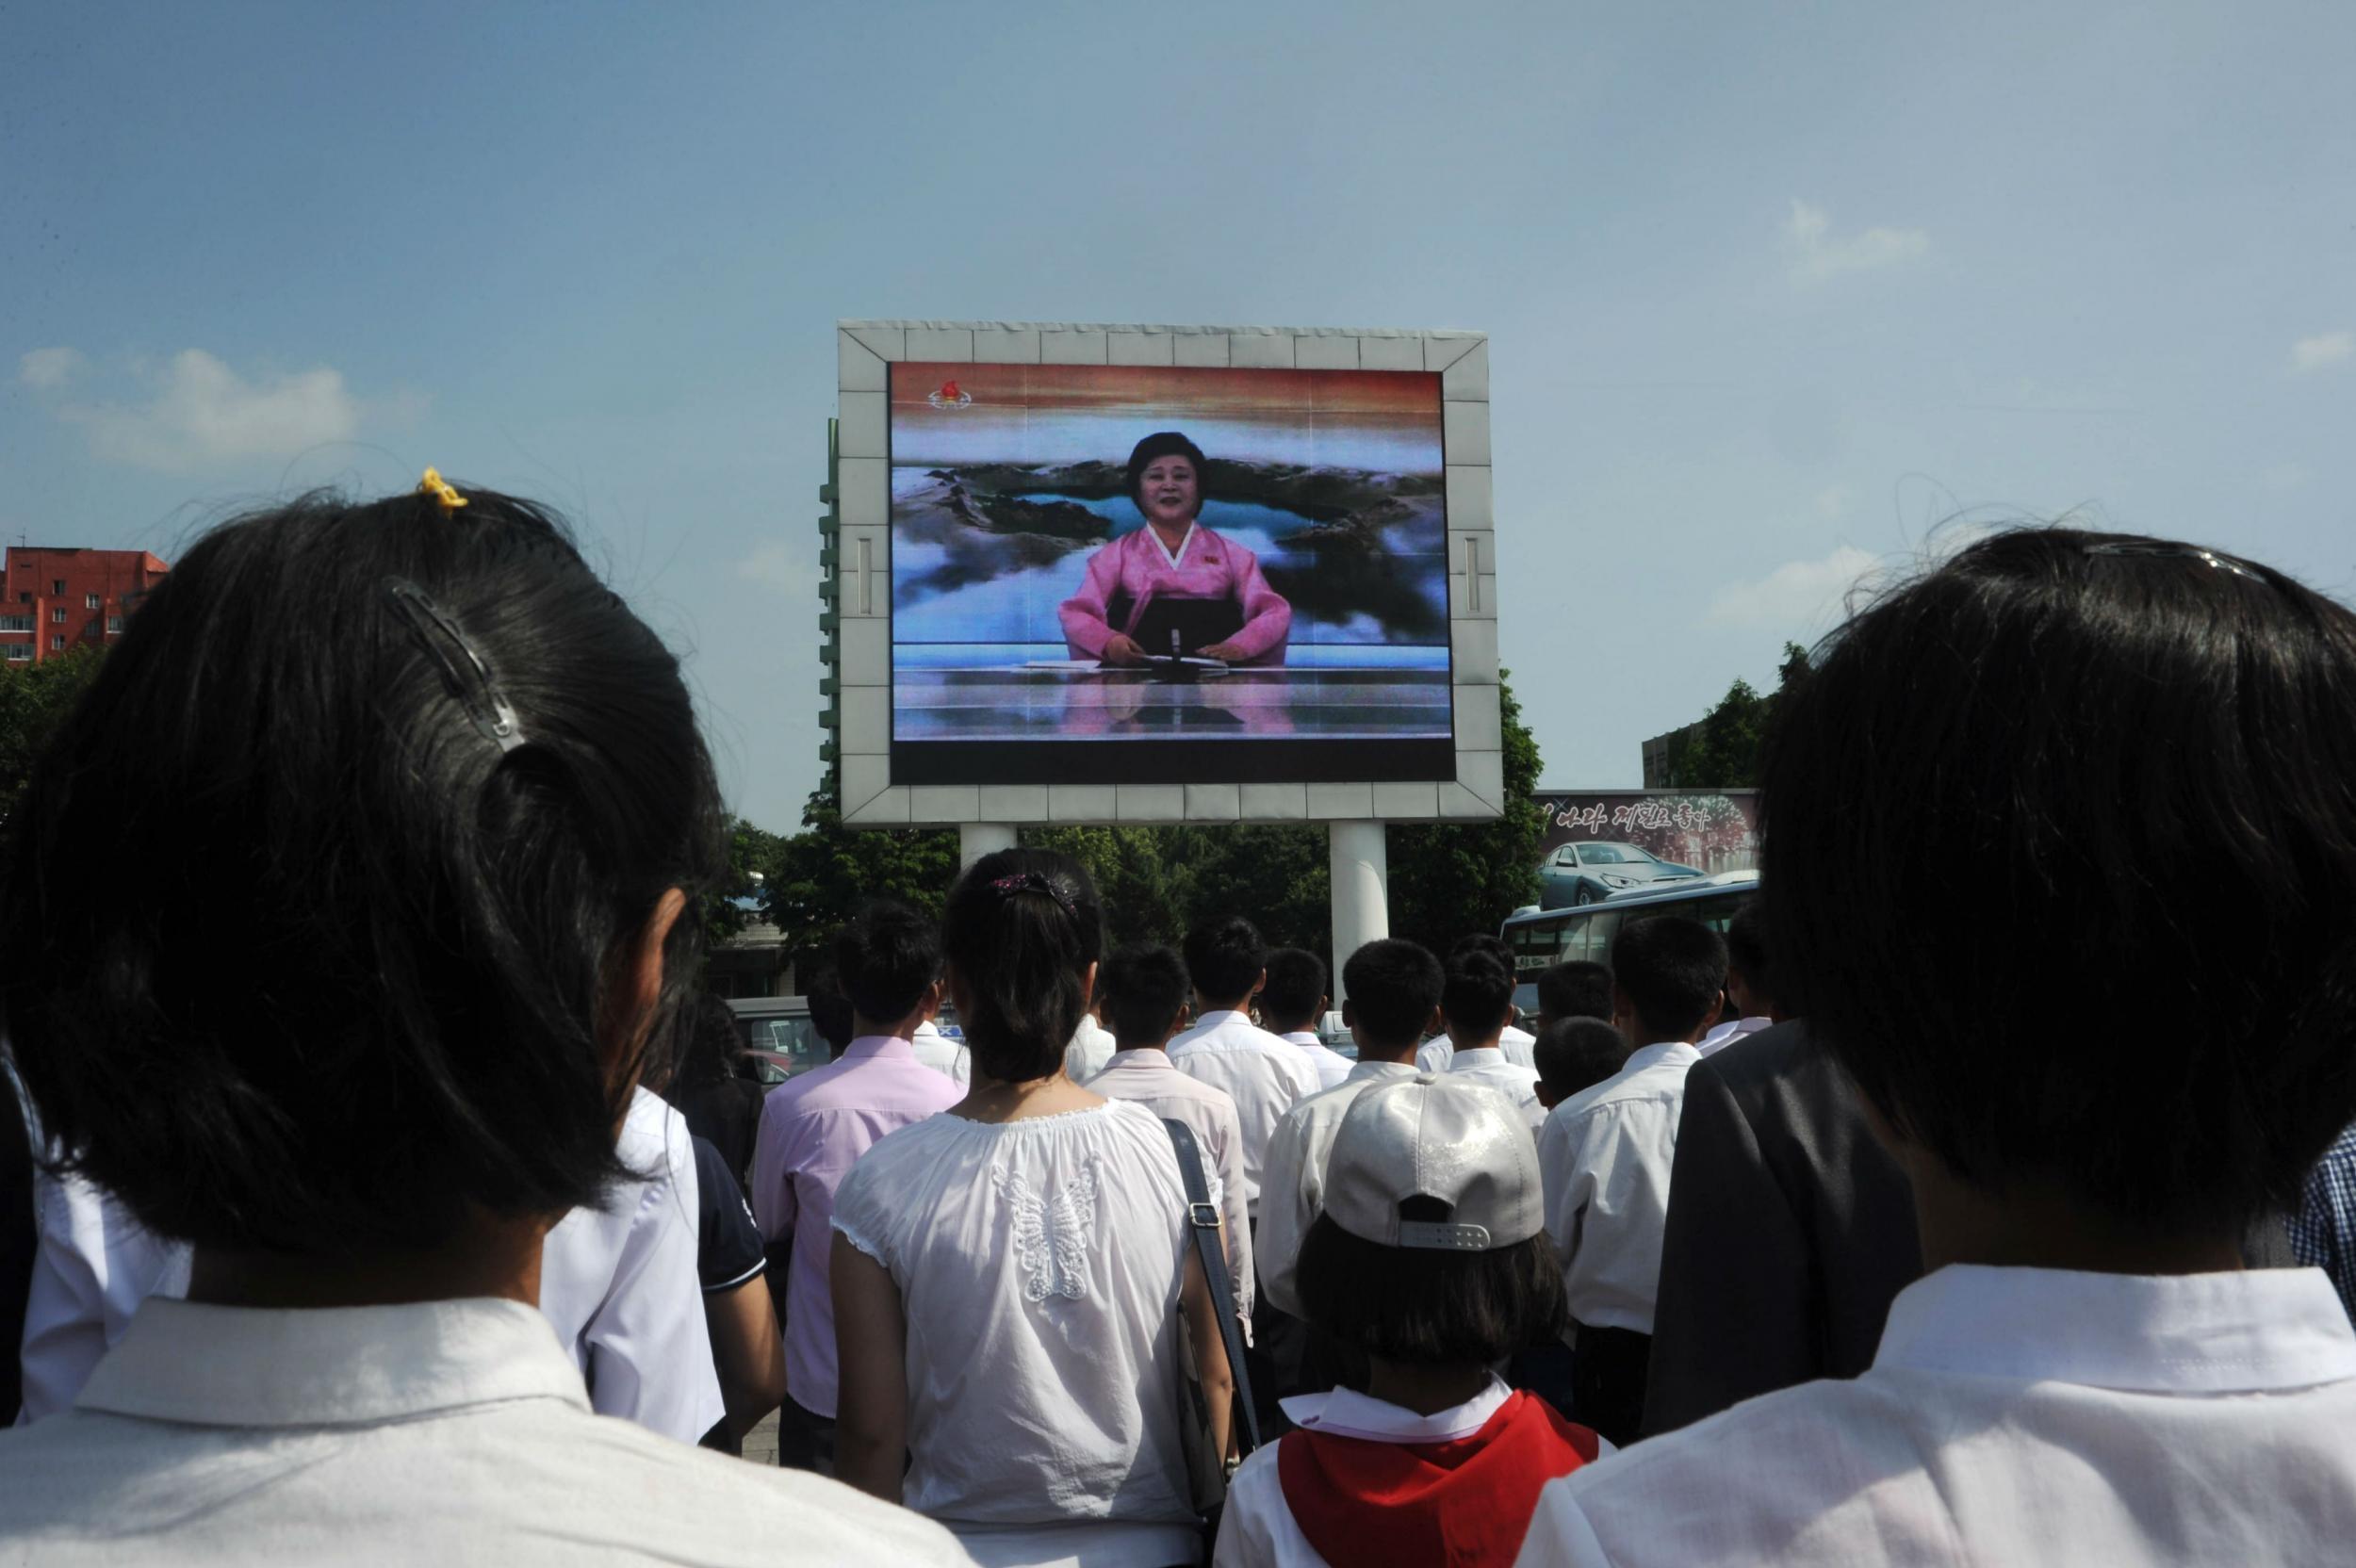 Pyongyang residents watch news of the successful launch of the intercontinental ballistic missile Hwasong-14 on a big screen on Tuesday